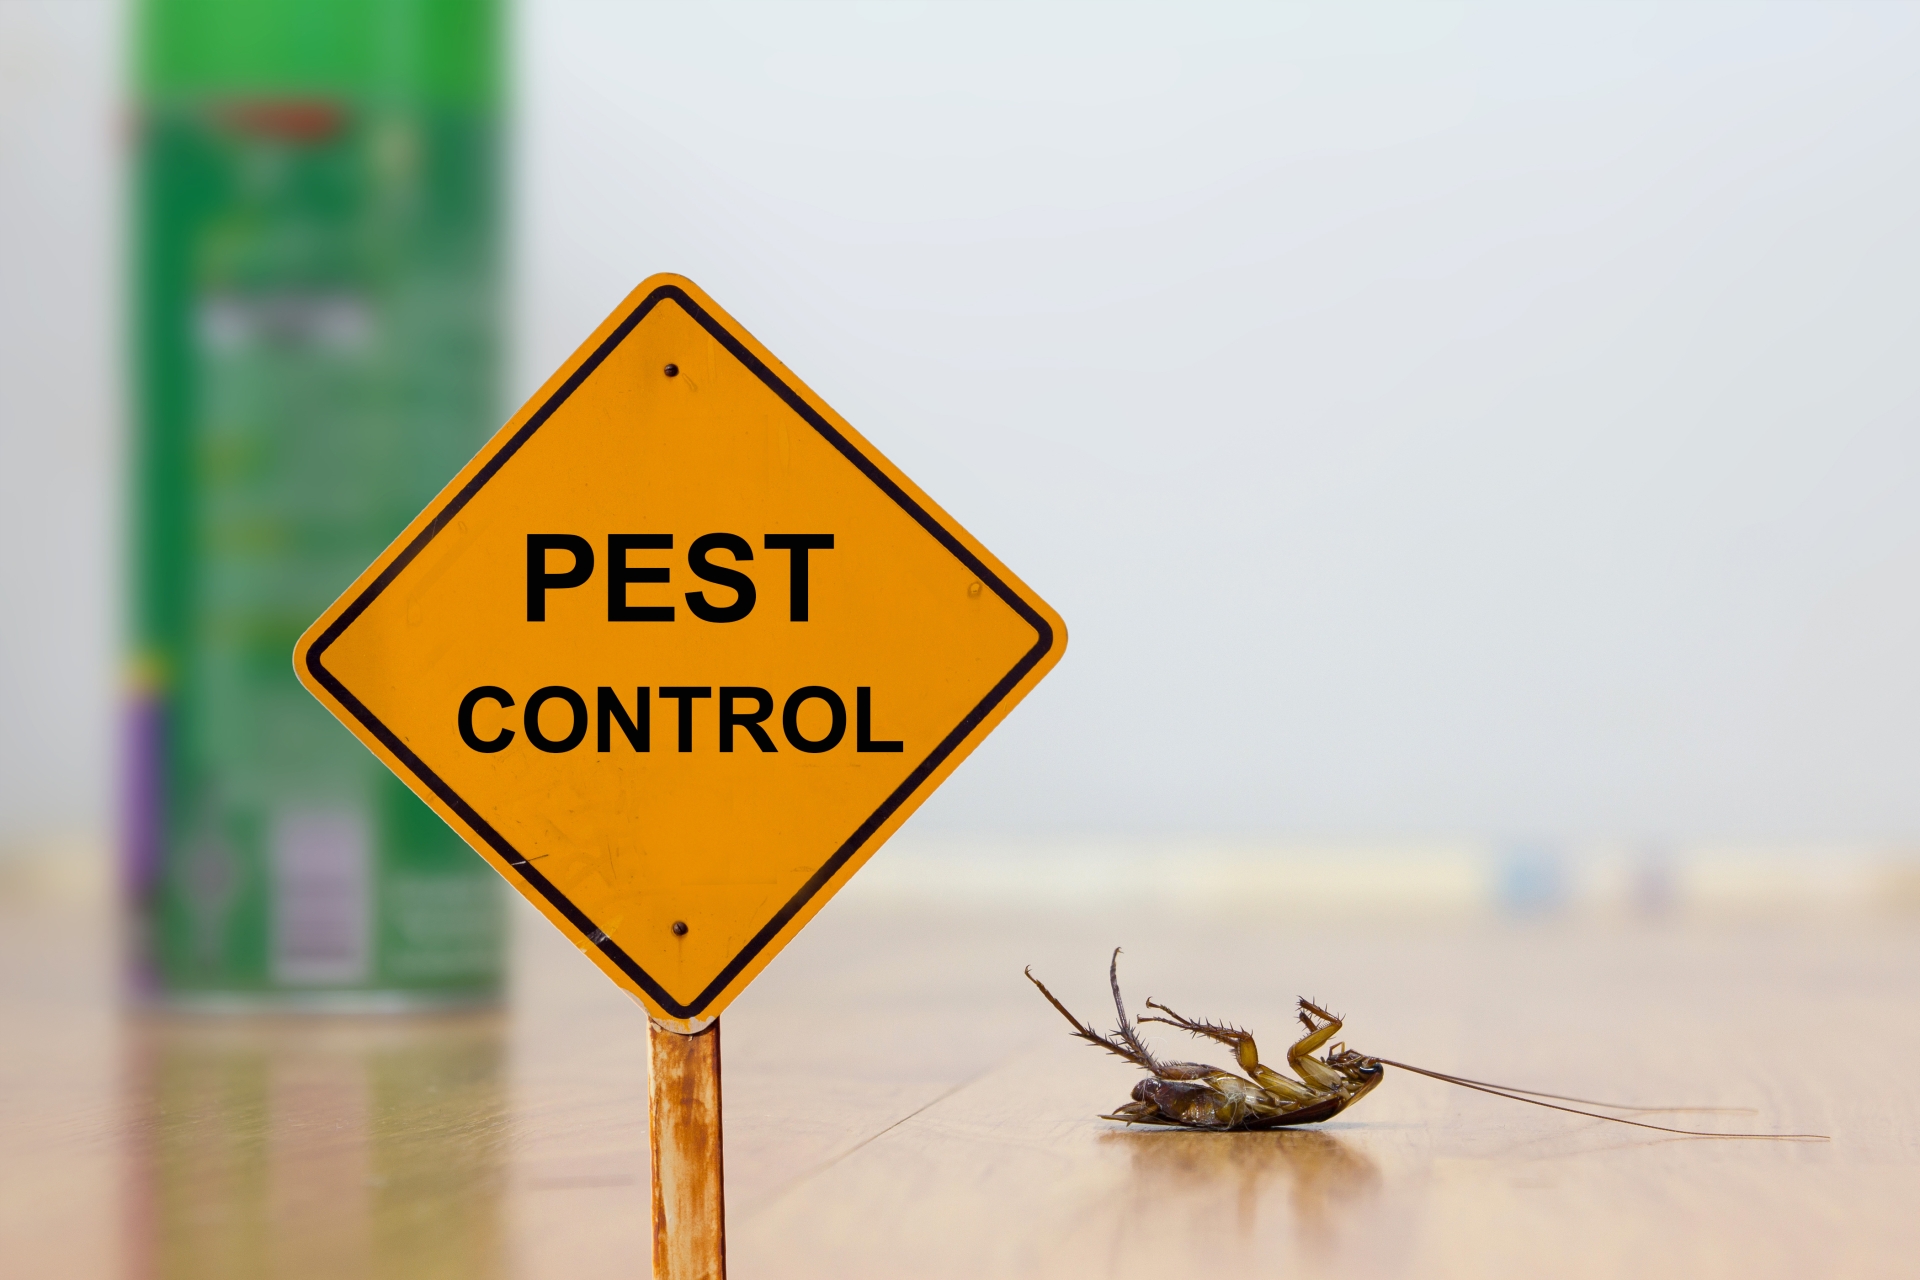 24 Hour Pest Control, Pest Control in Sunbury-on-Thames, TW16. Call Now 020 8166 9746